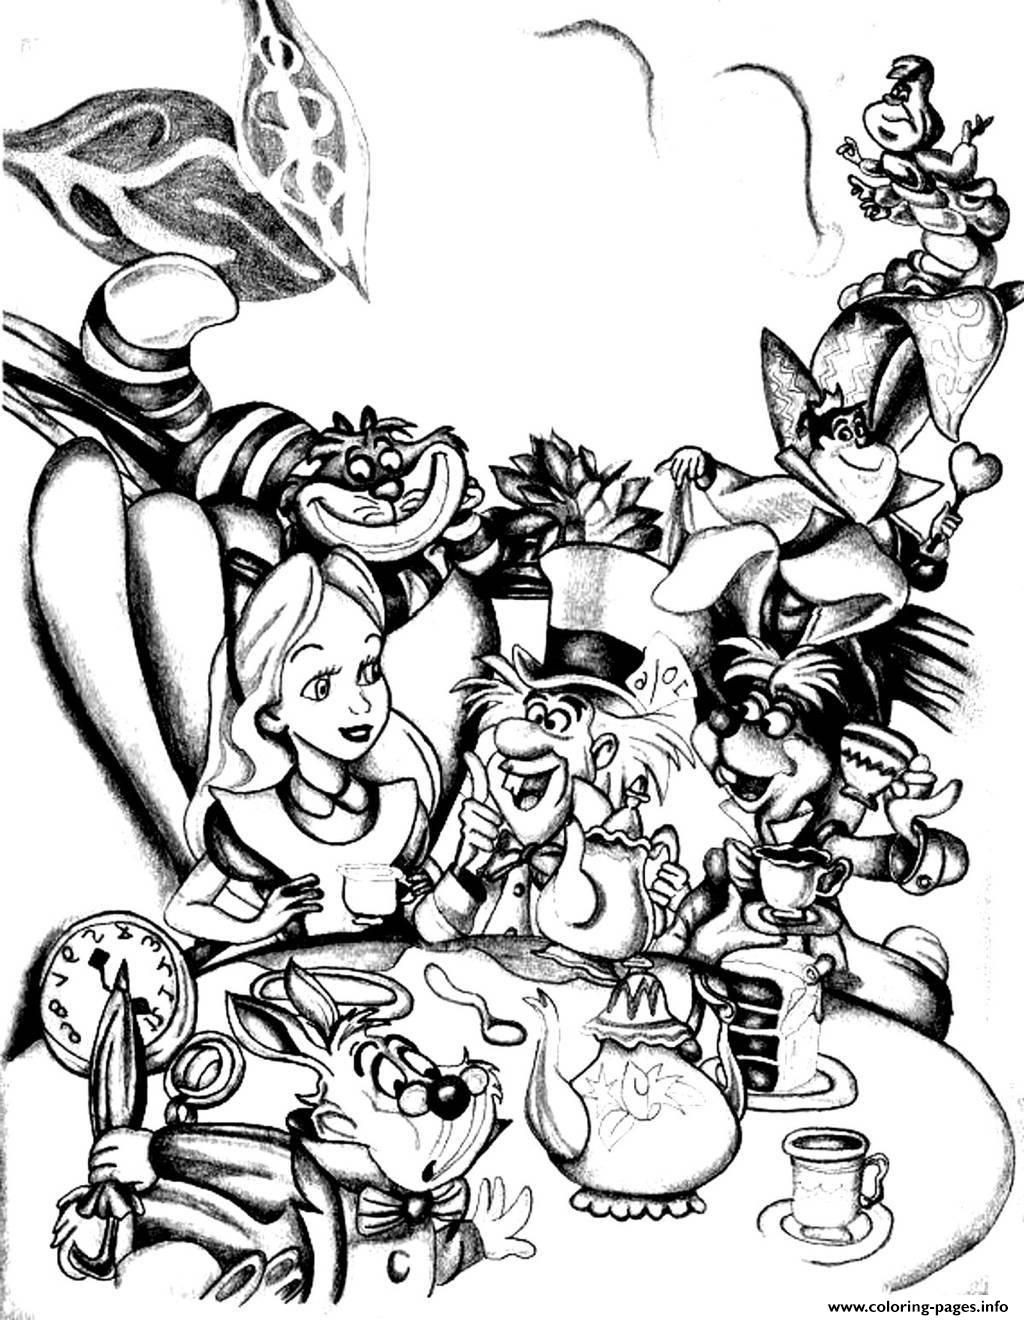 Adult Disney Coloring Pages
 adult disney drawing alice in wonderland Coloring pages